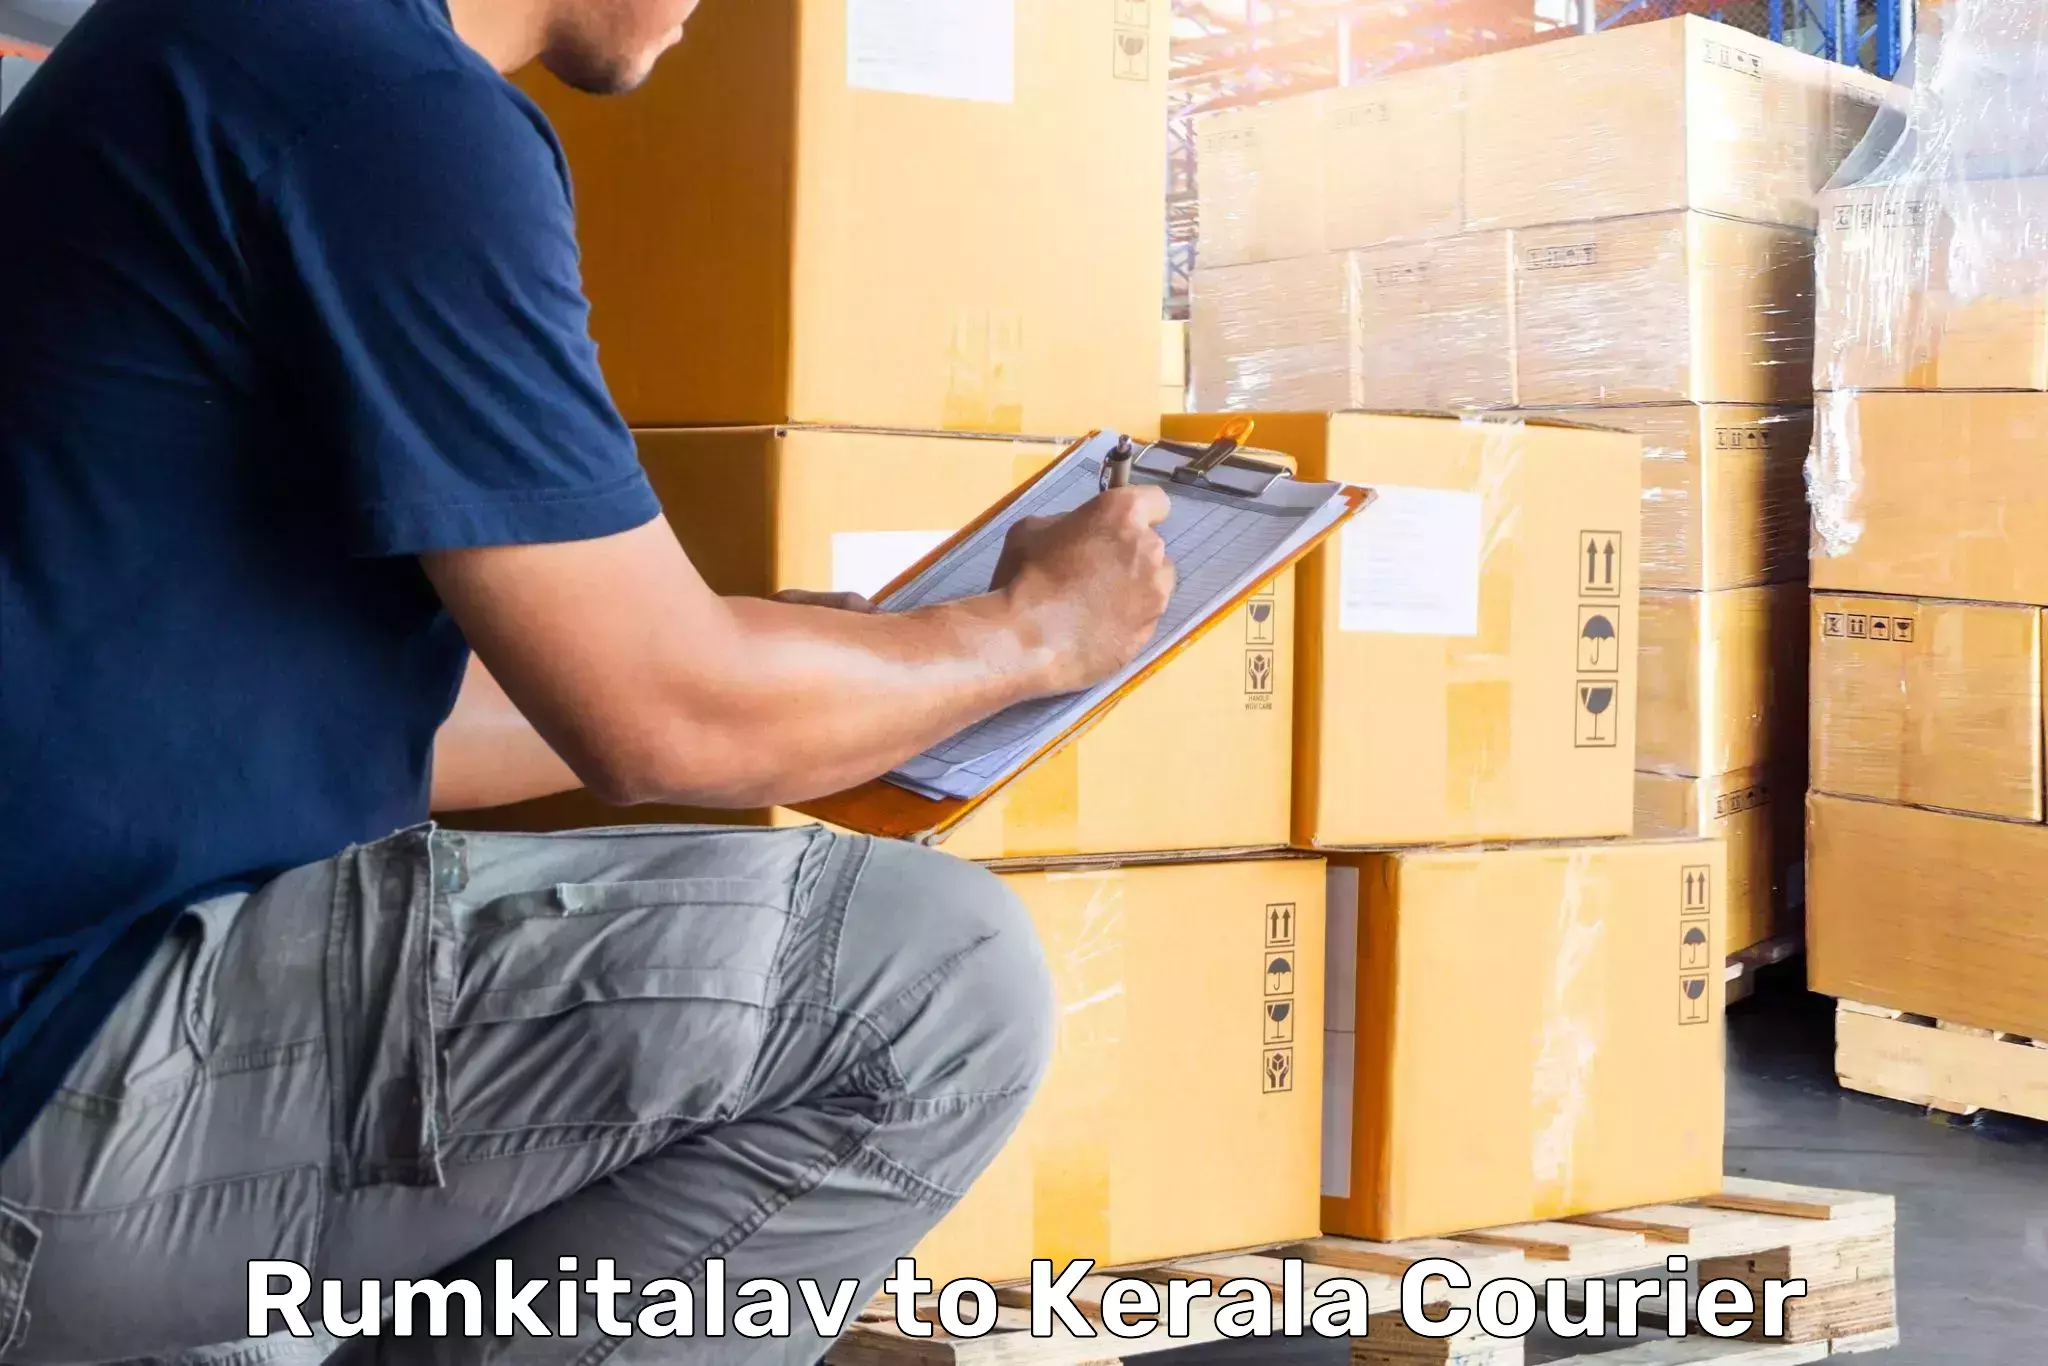 Luggage shipping discounts Rumkitalav to Cochin University of Science and Technology